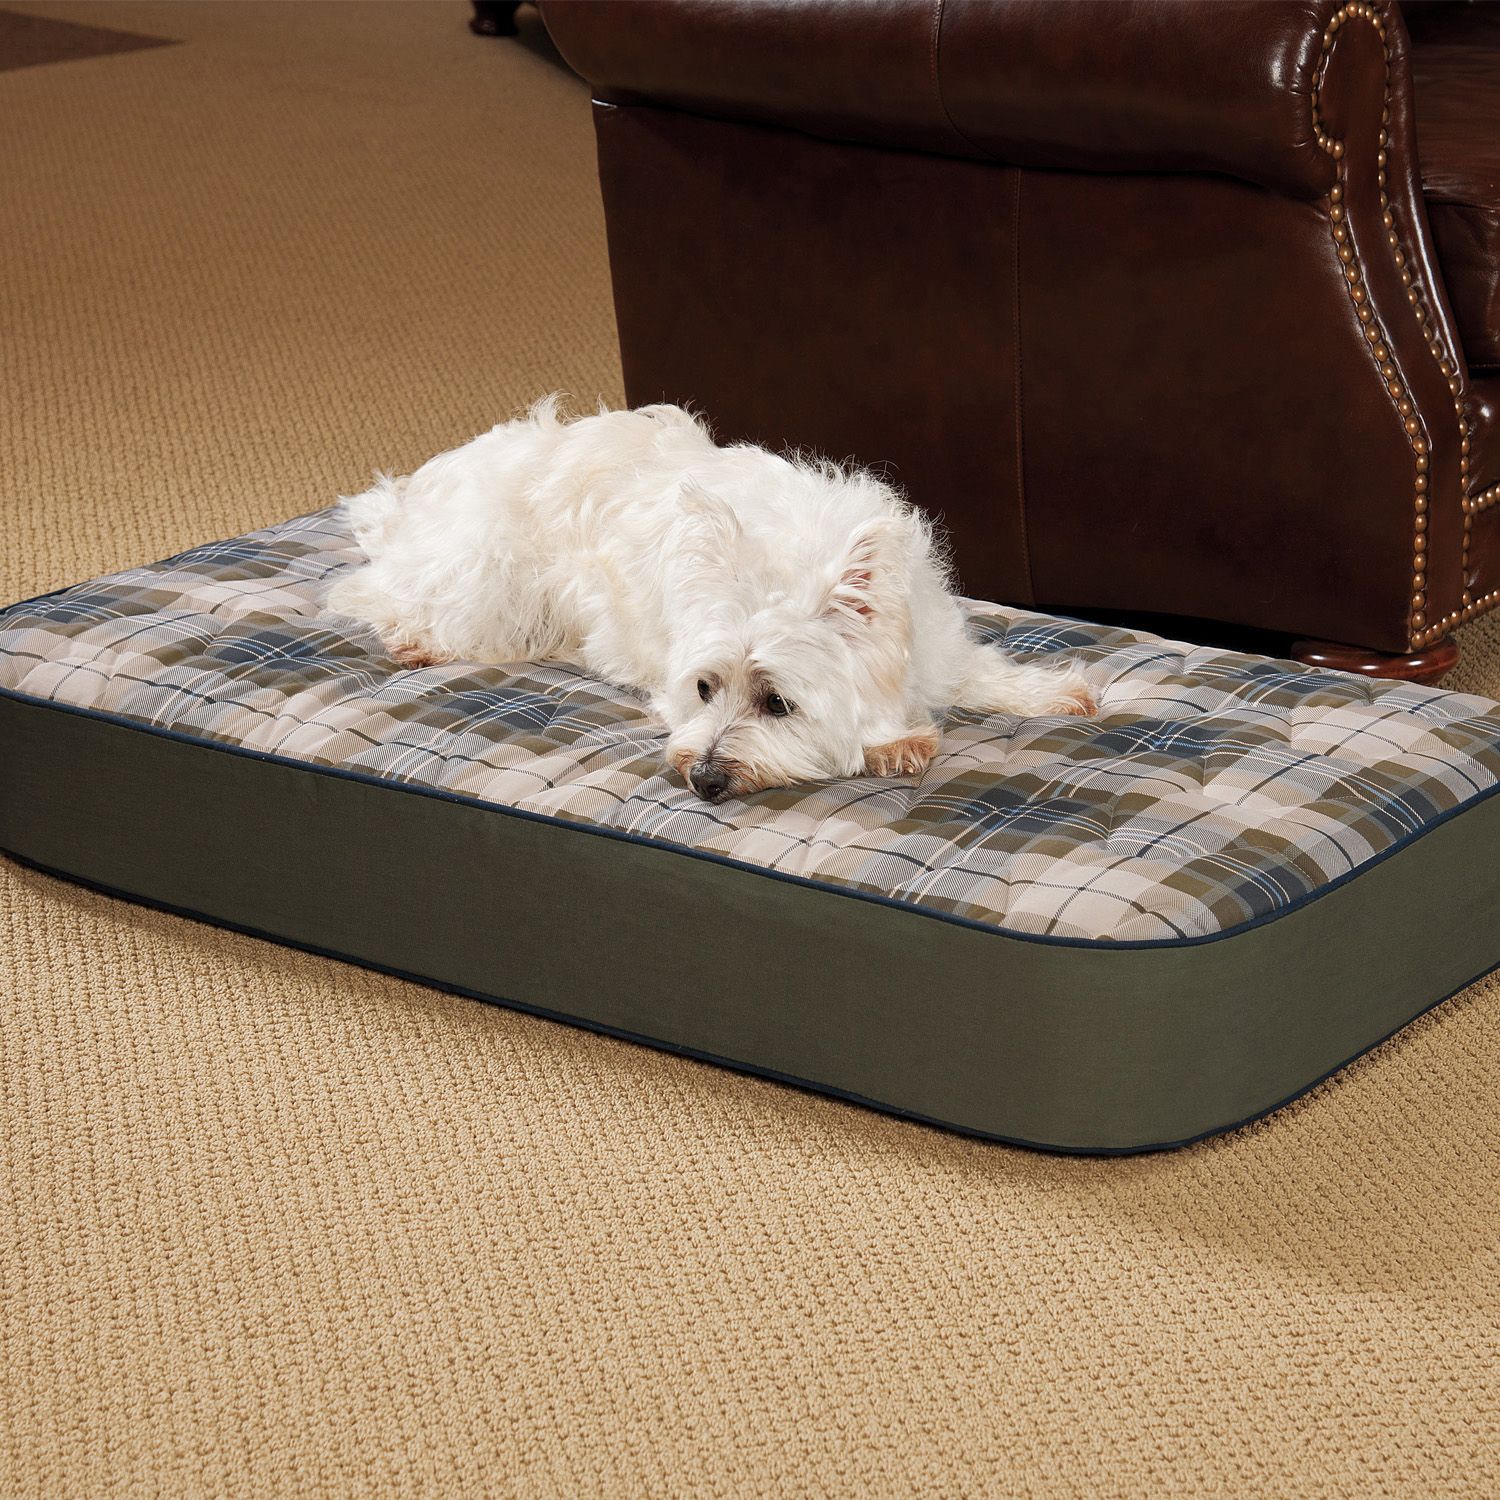 dr foster and smith dog beds